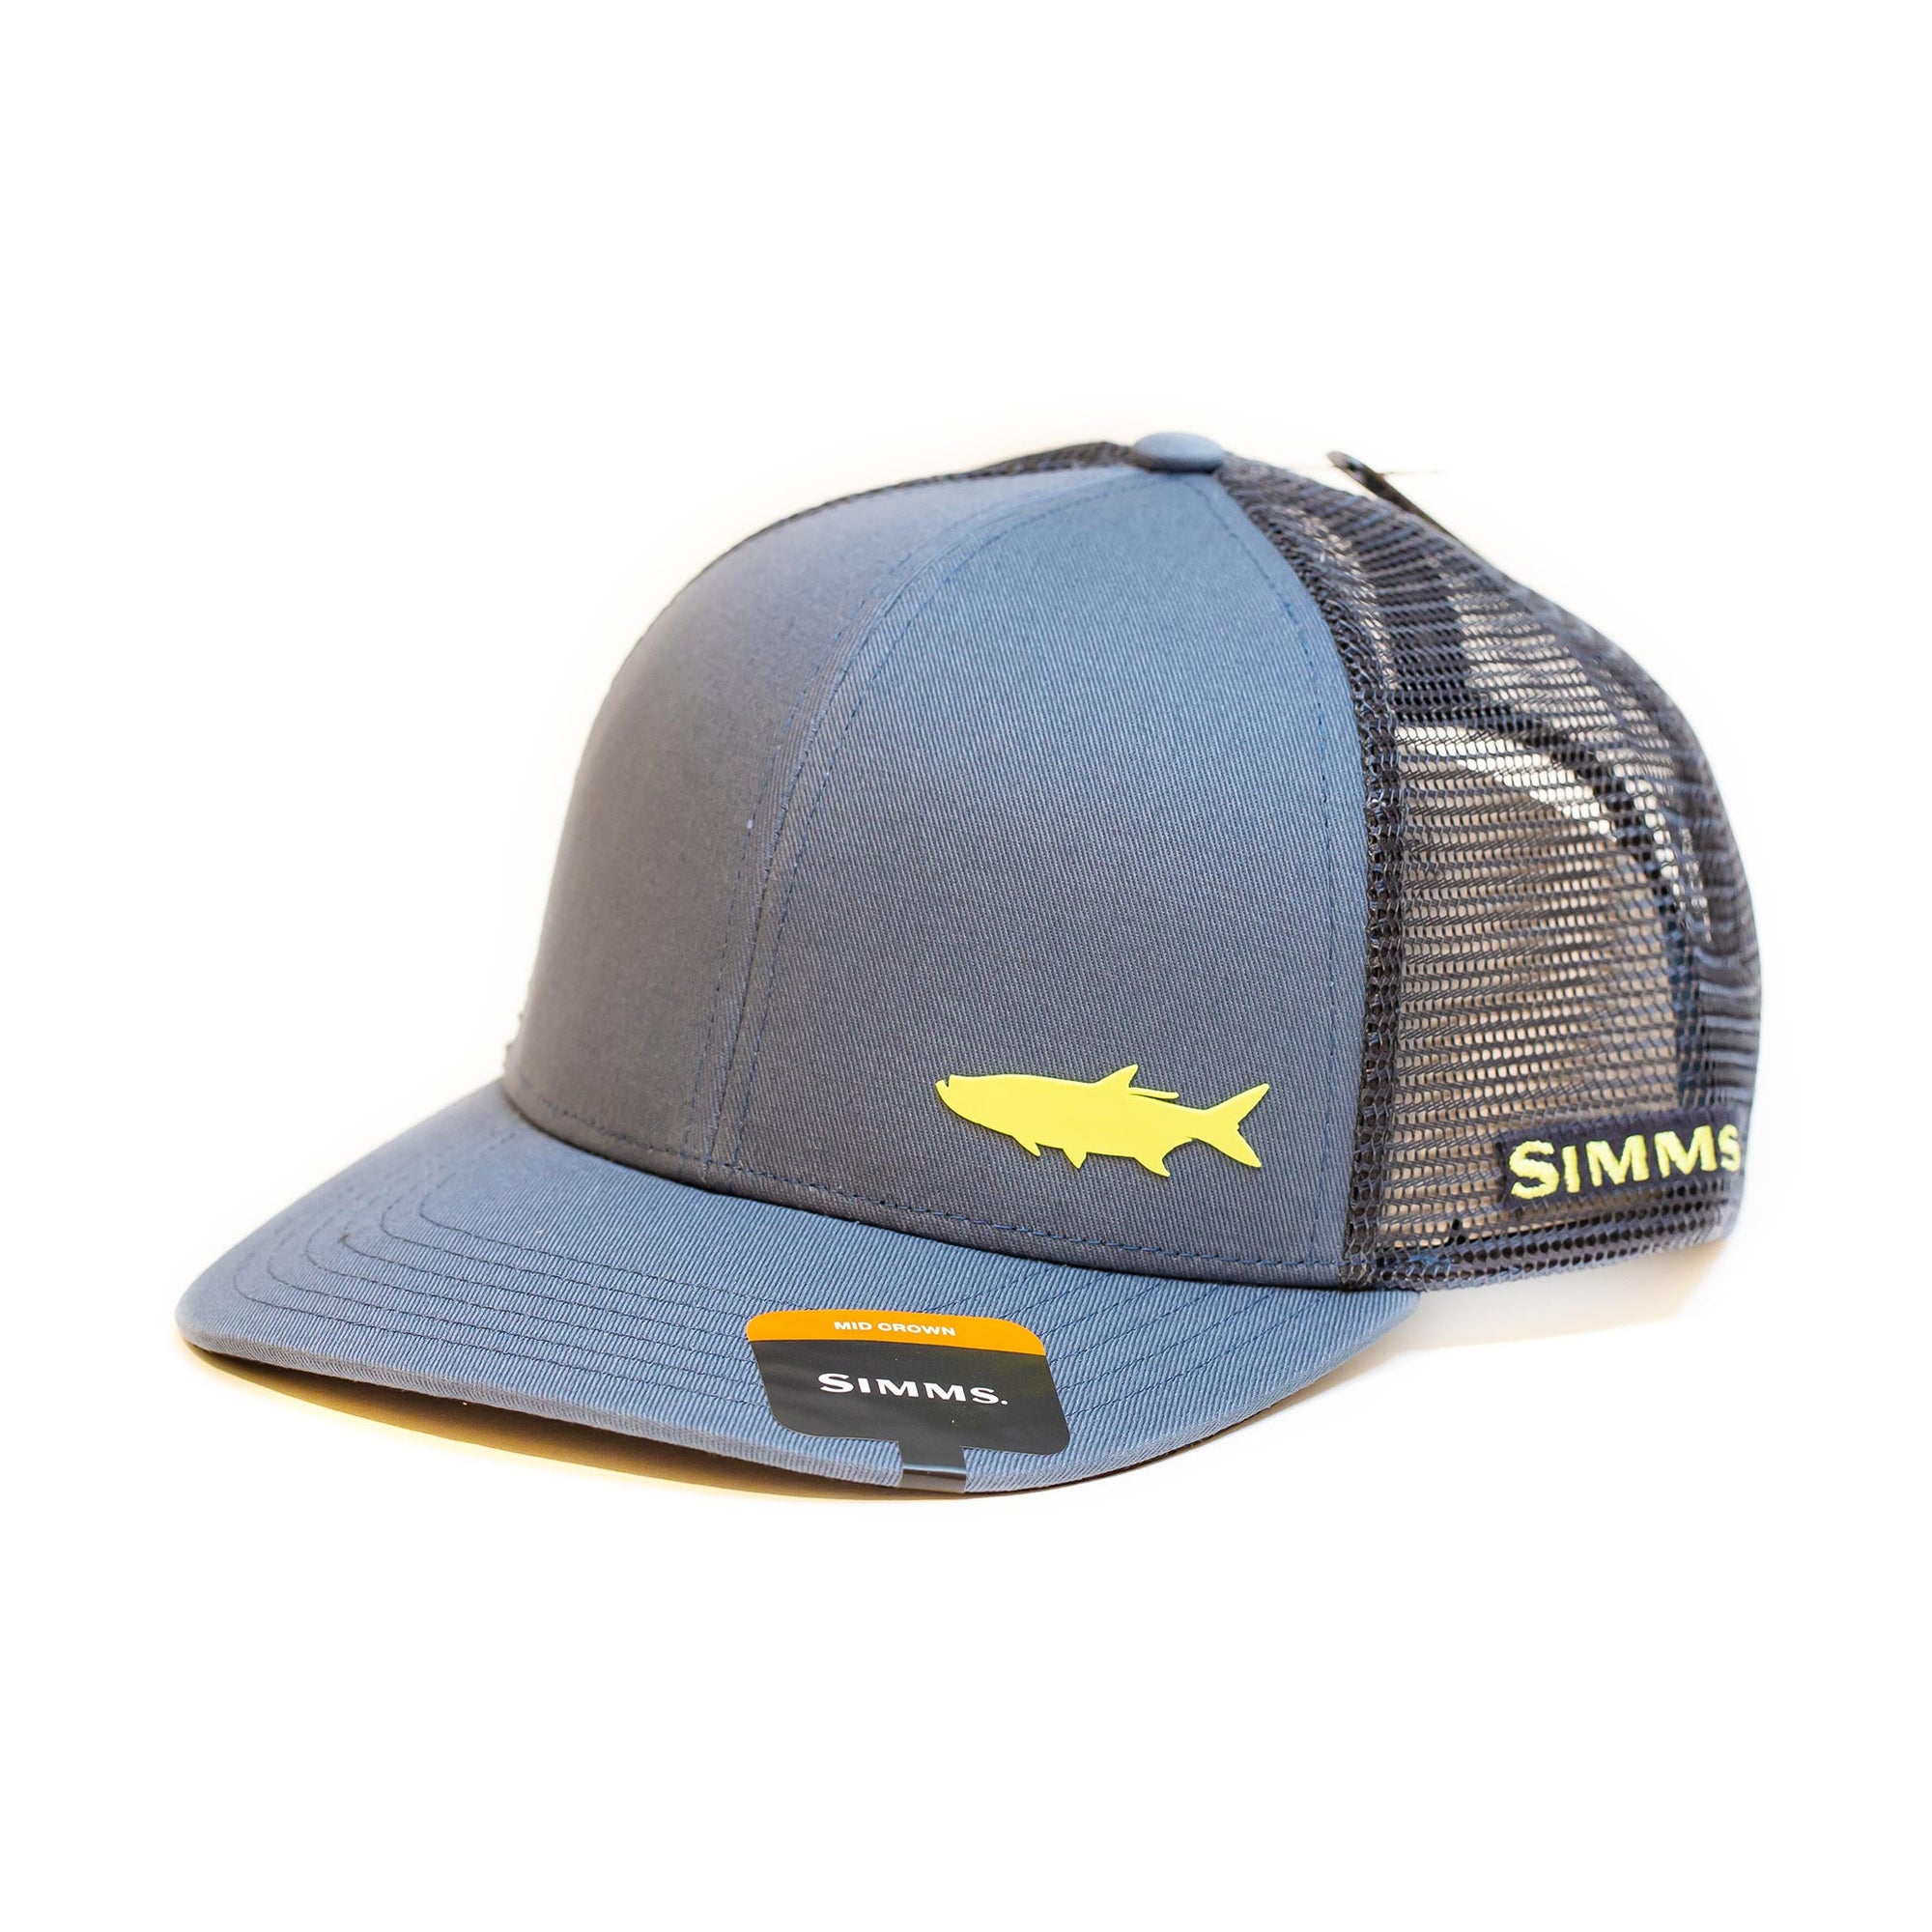 Simms Payoff Trucker Tarpon Storm Cap - Compleat Angler Nedlands